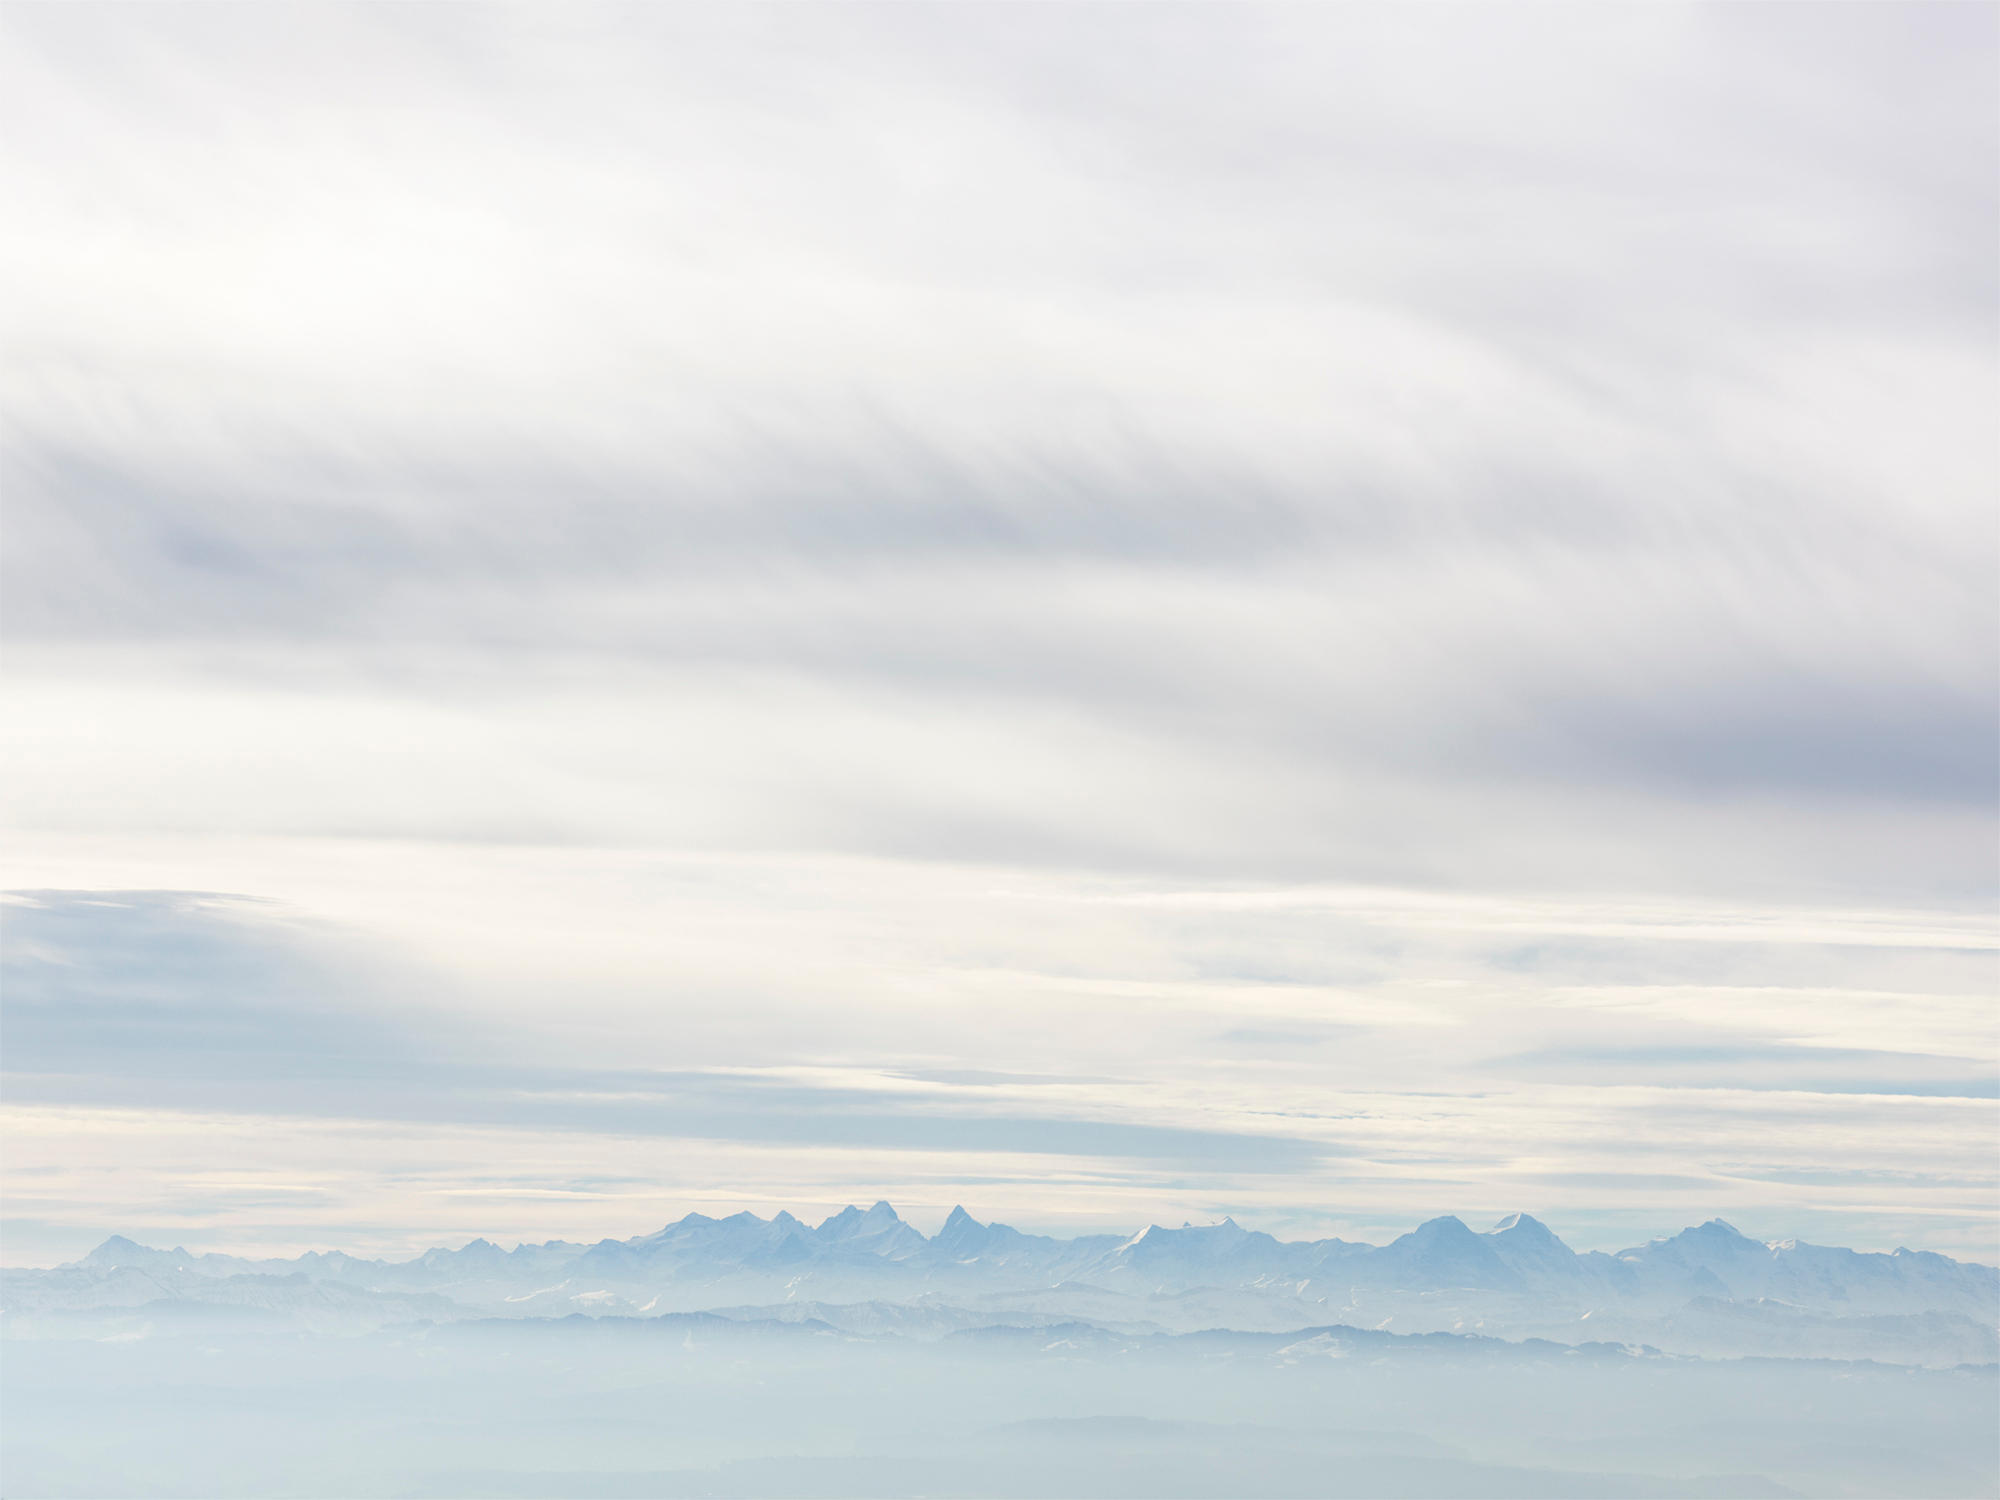 Bernese Alps in a distance